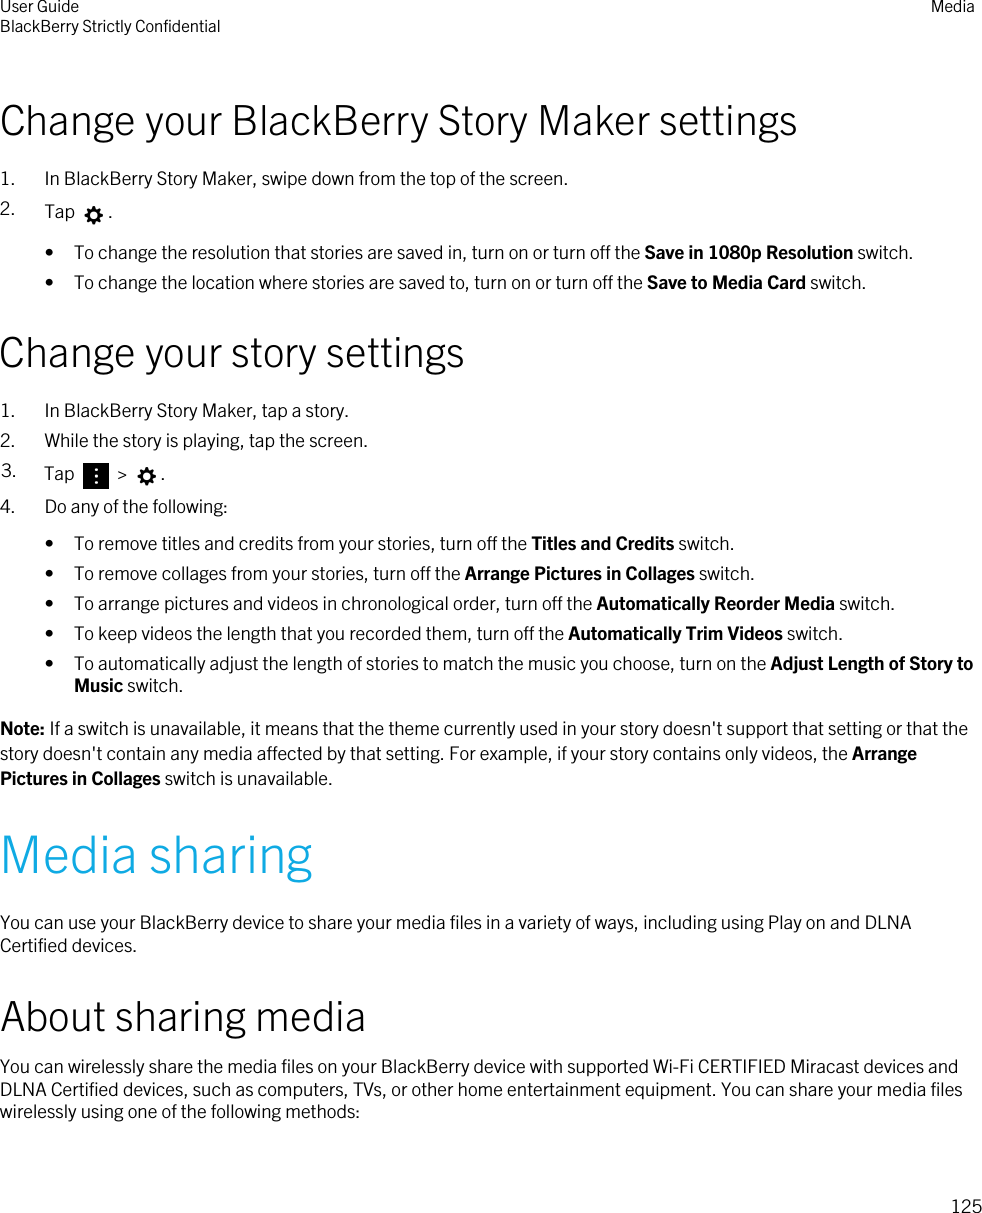 Change your BlackBerry Story Maker settings1. In BlackBerry Story Maker, swipe down from the top of the screen.2. Tap  .• To change the resolution that stories are saved in, turn on or turn off the Save in 1080p Resolution switch.• To change the location where stories are saved to, turn on or turn off the Save to Media Card switch.Change your story settings1. In BlackBerry Story Maker, tap a story.2. While the story is playing, tap the screen.3. Tap   &gt;  .4. Do any of the following:• To remove titles and credits from your stories, turn off the Titles and Credits switch.• To remove collages from your stories, turn off the Arrange Pictures in Collages switch.• To arrange pictures and videos in chronological order, turn off the Automatically Reorder Media switch.• To keep videos the length that you recorded them, turn off the Automatically Trim Videos switch.• To automatically adjust the length of stories to match the music you choose, turn on the Adjust Length of Story to Music switch.Note: If a switch is unavailable, it means that the theme currently used in your story doesn&apos;t support that setting or that the story doesn&apos;t contain any media affected by that setting. For example, if your story contains only videos, the Arrange Pictures in Collages switch is unavailable.Media sharingYou can use your BlackBerry device to share your media files in a variety of ways, including using Play on and DLNA Certified devices.About sharing mediaYou can wirelessly share the media files on your BlackBerry device with supported Wi-Fi CERTIFIED Miracast devices and DLNA Certified devices, such as computers, TVs, or other home entertainment equipment. You can share your media files wirelessly using one of the following methods:User GuideBlackBerry Strictly Confidential Media125